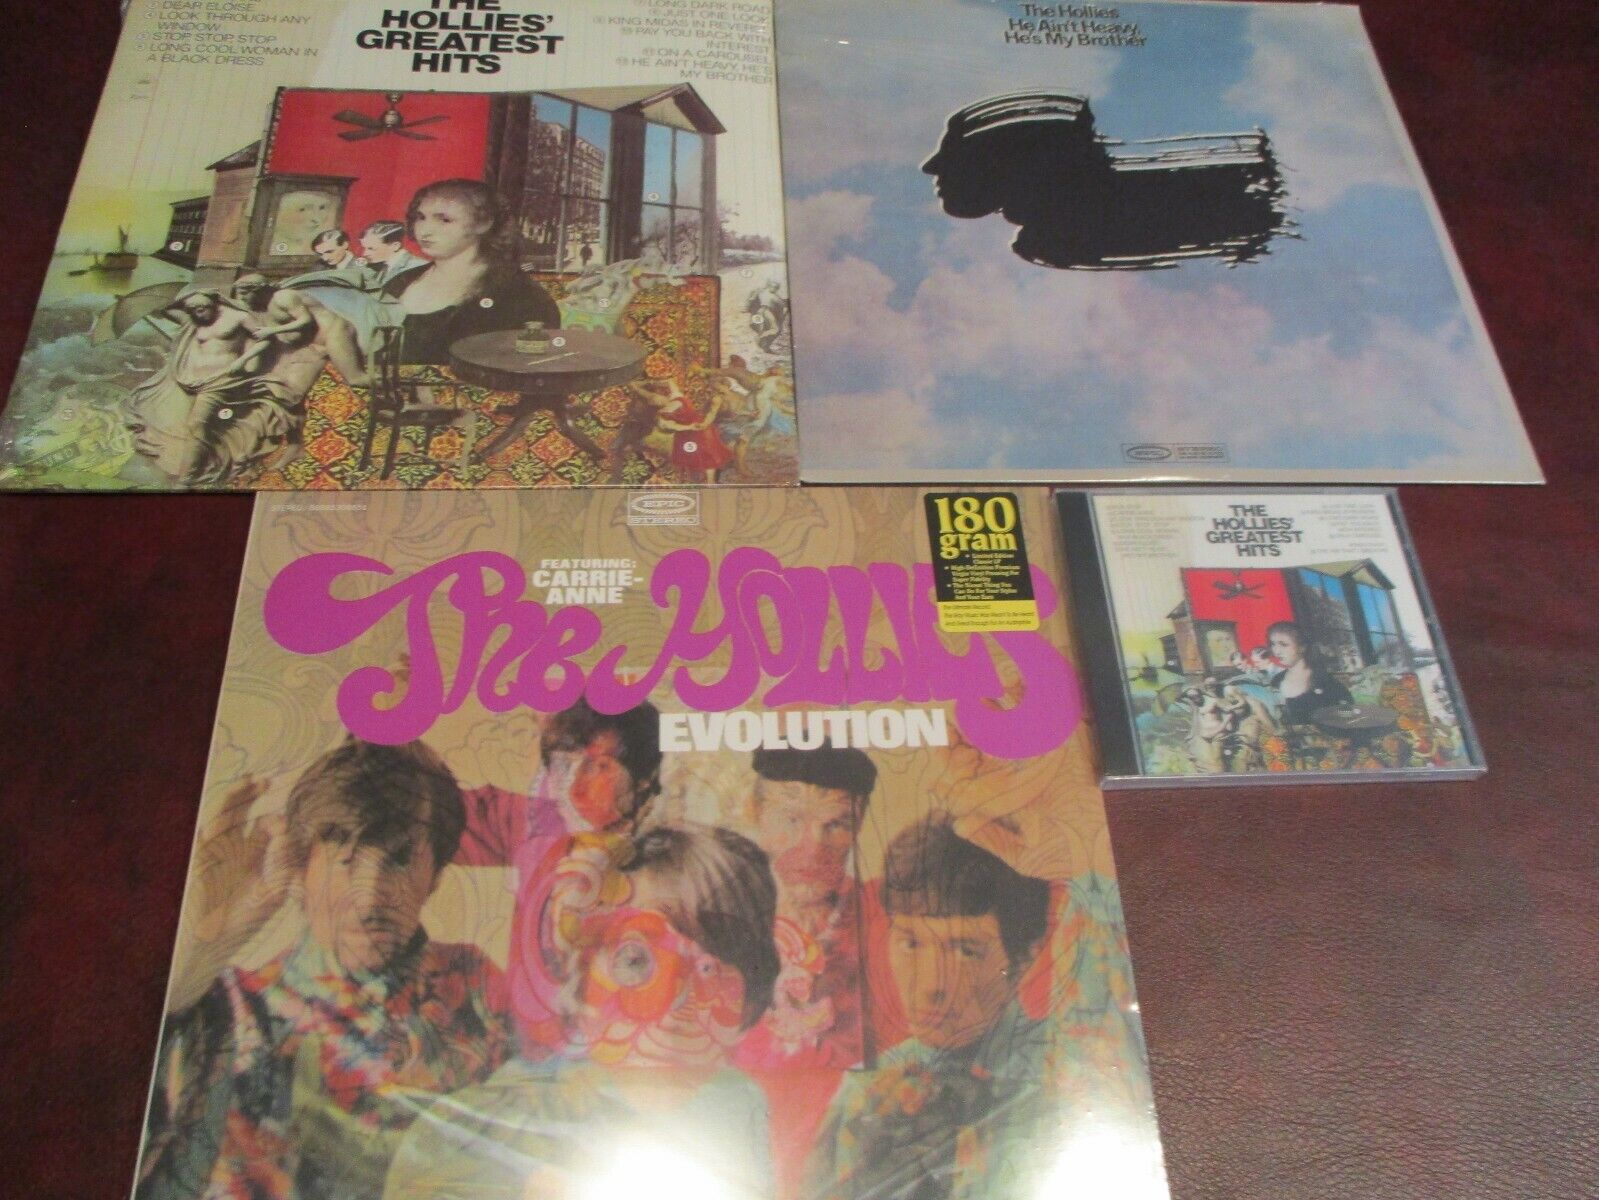 THE HOLLIES GREAT HITS & EVOLUTION 180 GRAM LP+ HE'S MY BROTHER RARE 3 LP'S + CD